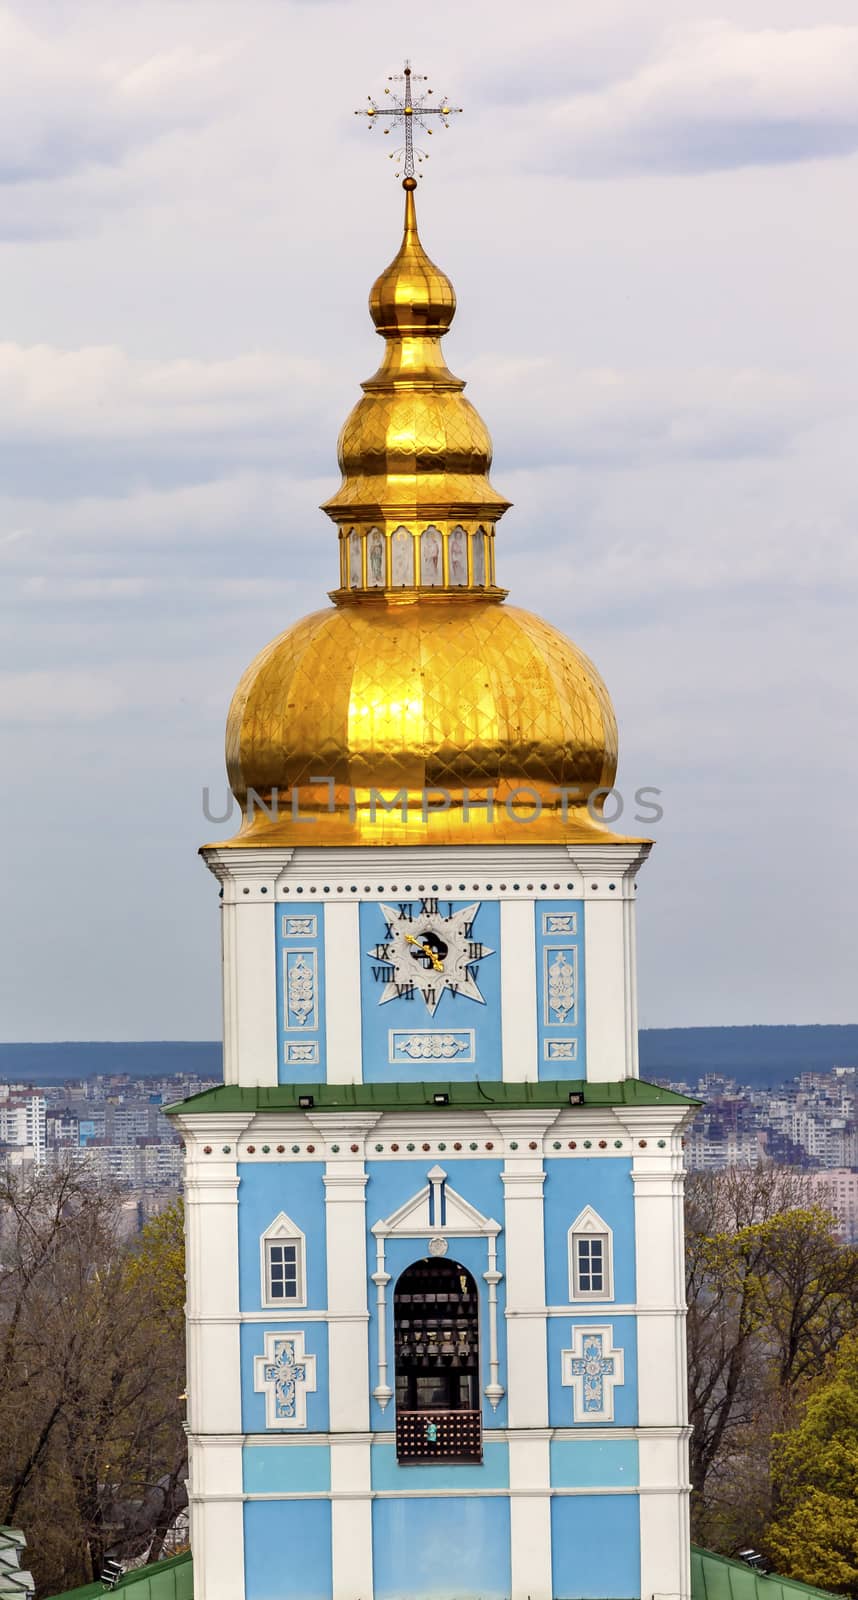 Saint Michael Monastery Cathedral Tower Golden Domes Kiev Ukraine.  Saint Michael's is a functioning Greek Orthordox Monasatery in Kiev.  The original monastery was created in the 1100s but was destroyed by the Soviet Union in the 1930s.  St. Michaels was reconstructed after Ukrainian independencein 1991 and reopened in 1999.